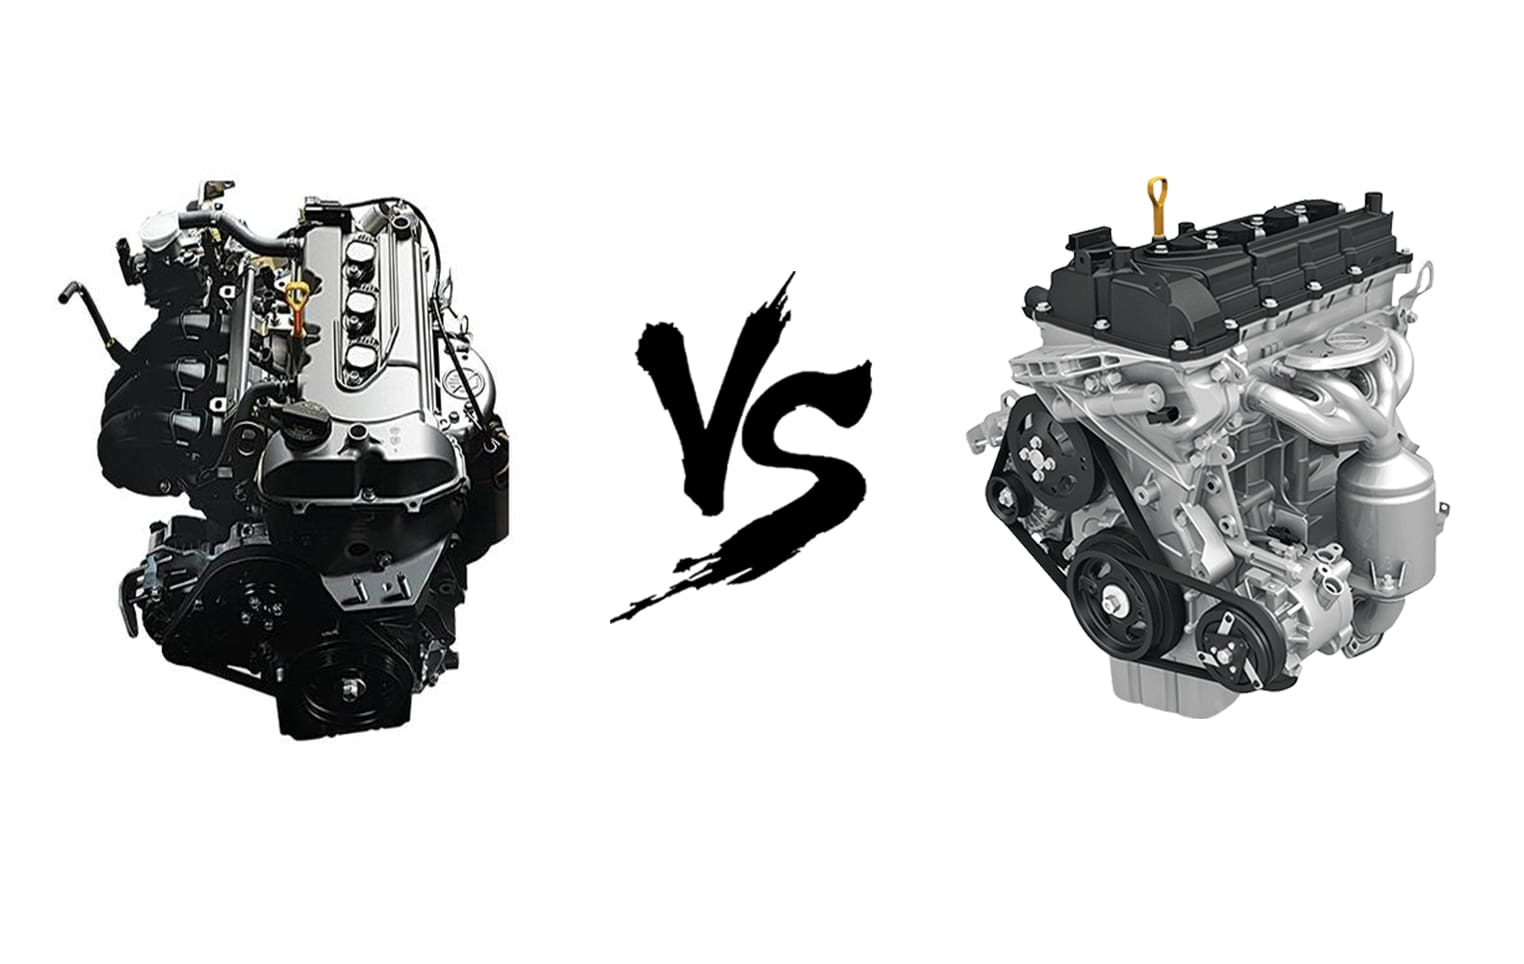 3 Cylinder Engine Vs 4 Cylinder Engine: The Differences And